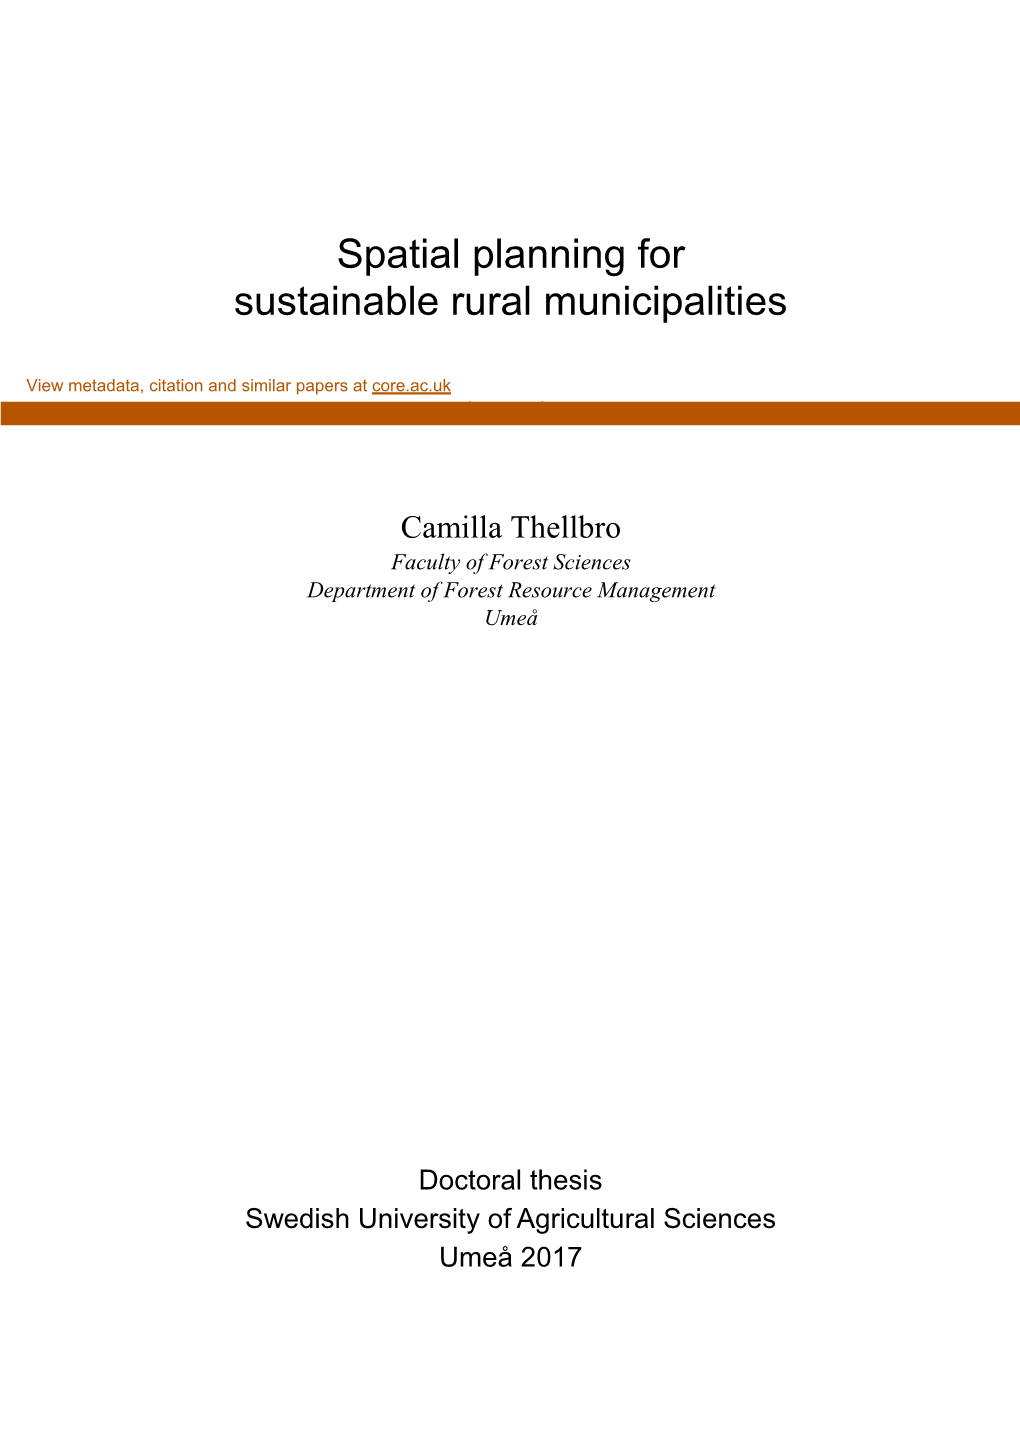 Spatial Planning for Sustainable Rural Municipalities